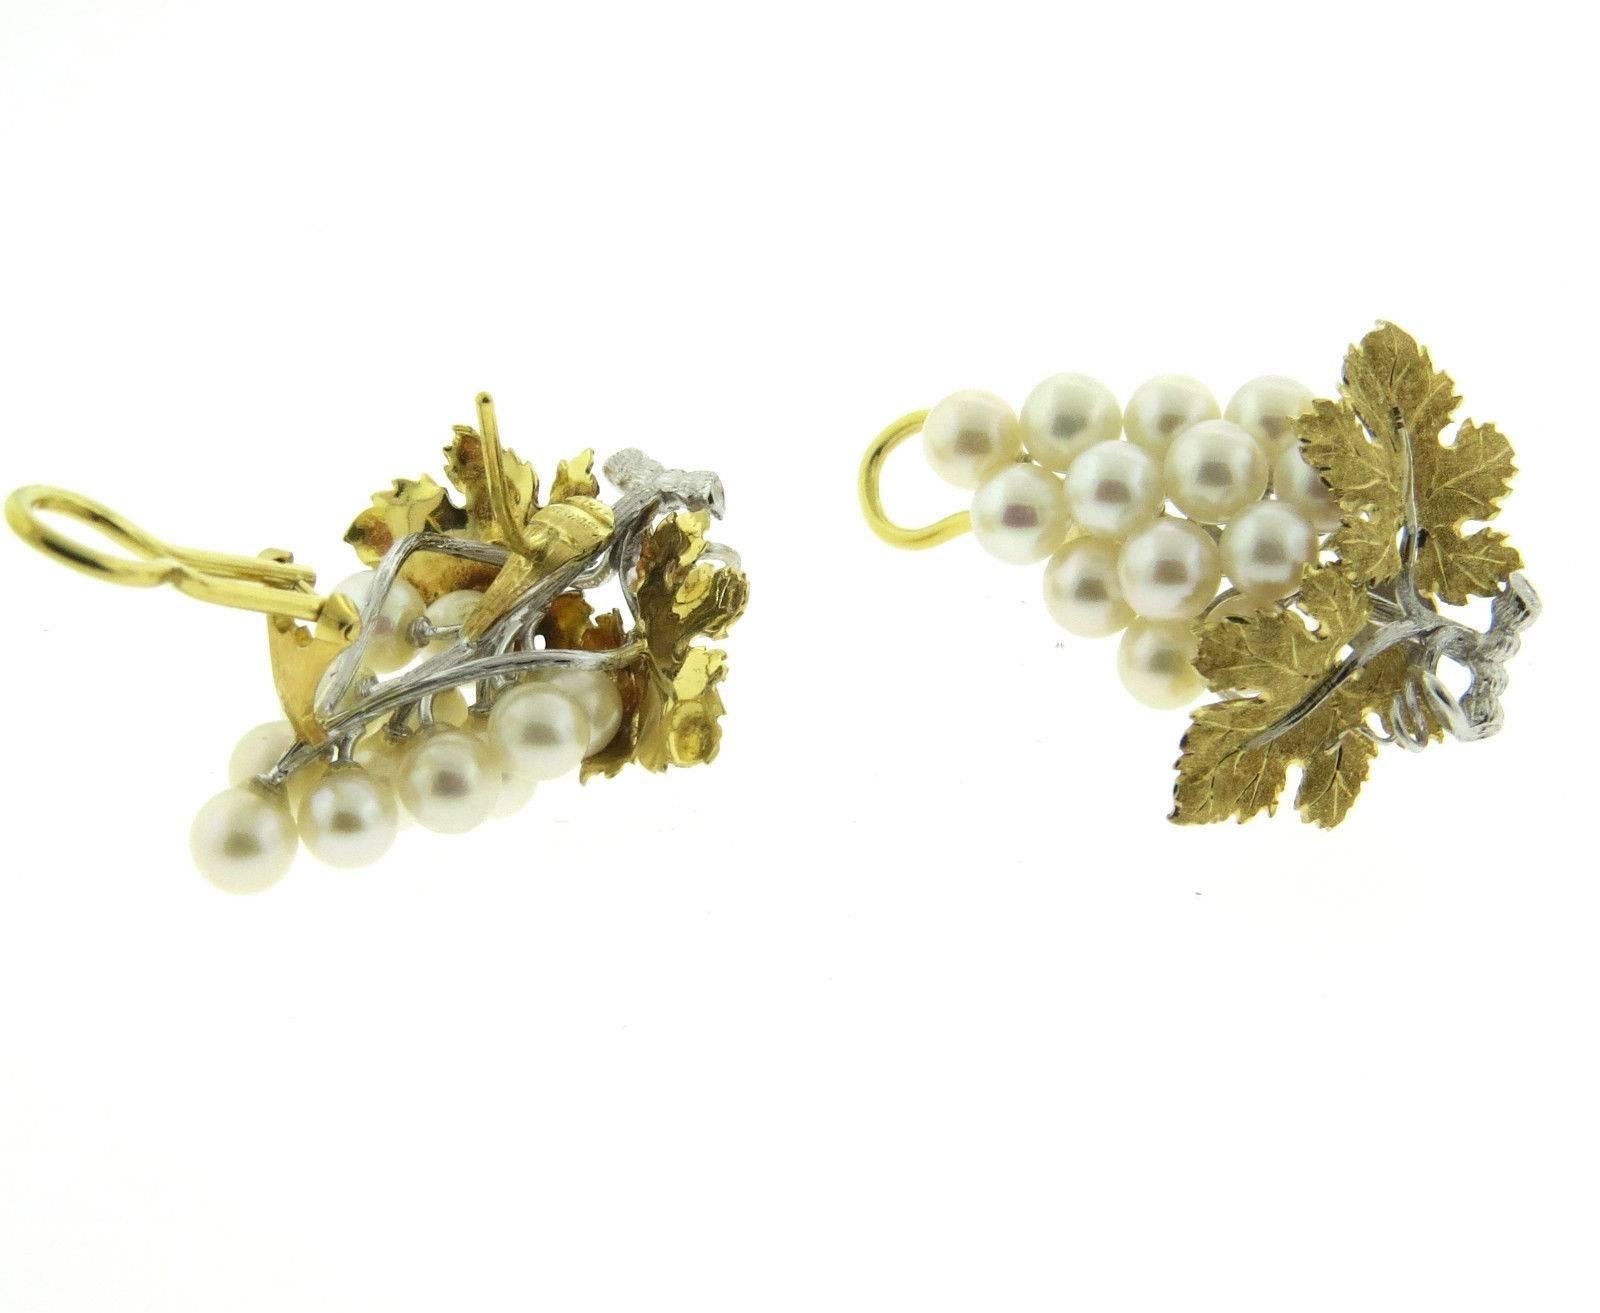 A pair of 18k yellow and white gold grape vine earrings set with 5.3mm - 5.5mm pearls.  Crafted by Buccellati, the earrings measure 35mm x 30mm and weigh 17.7 grams.  Marked: Buccellati Italy. Earrings coome with original Buccellati paperwork.